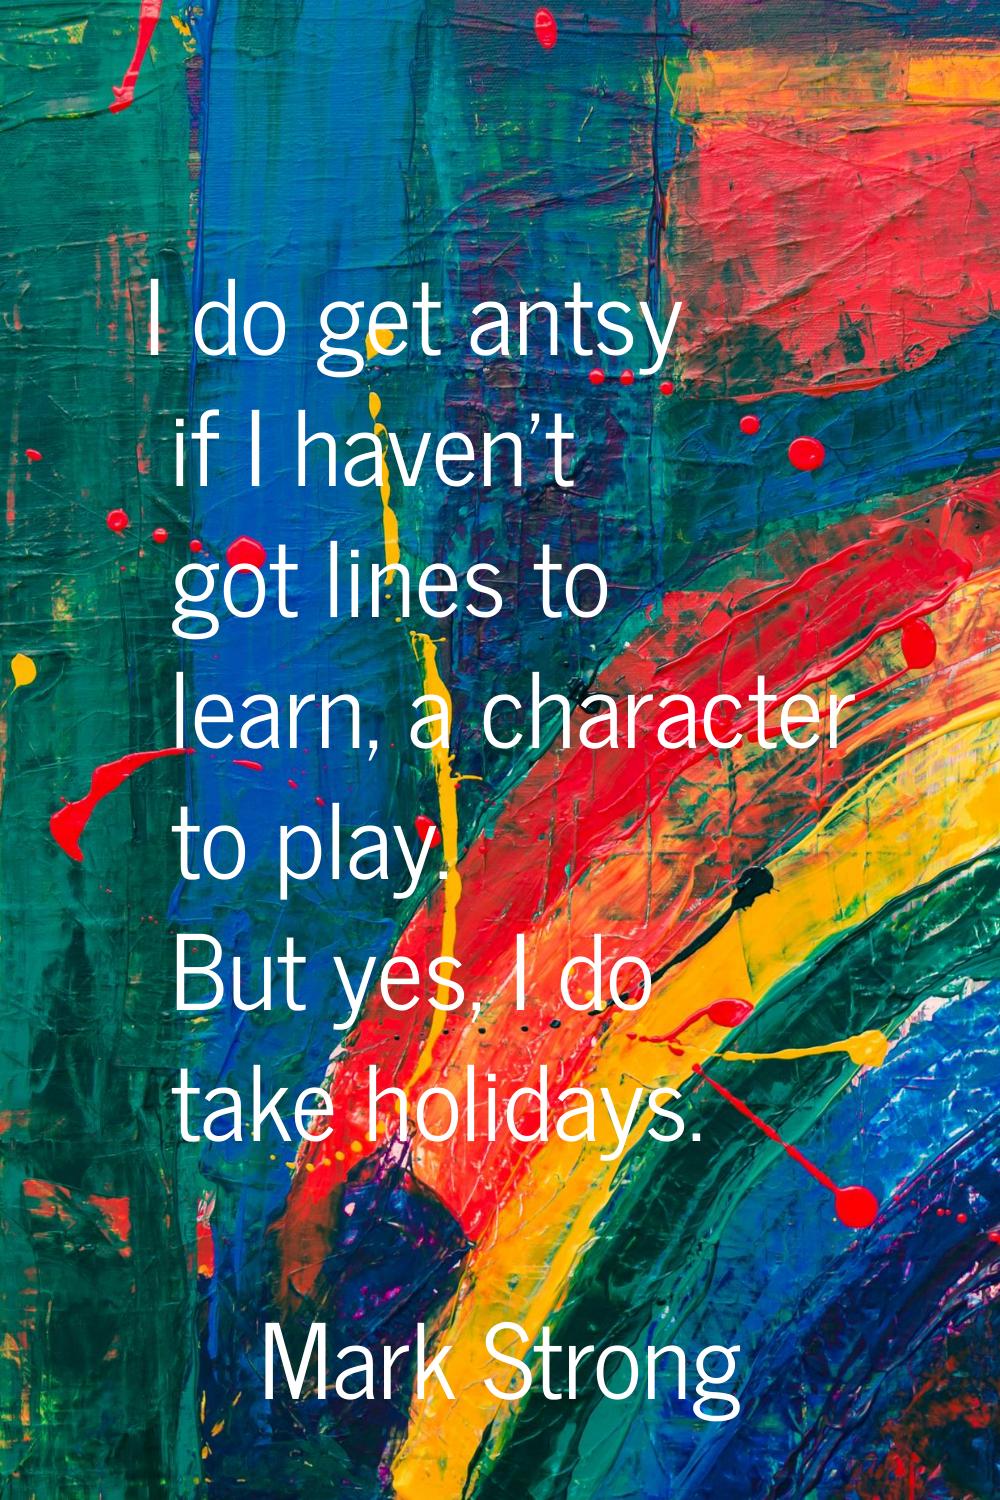 I do get antsy if I haven't got lines to learn, a character to play. But yes, I do take holidays.